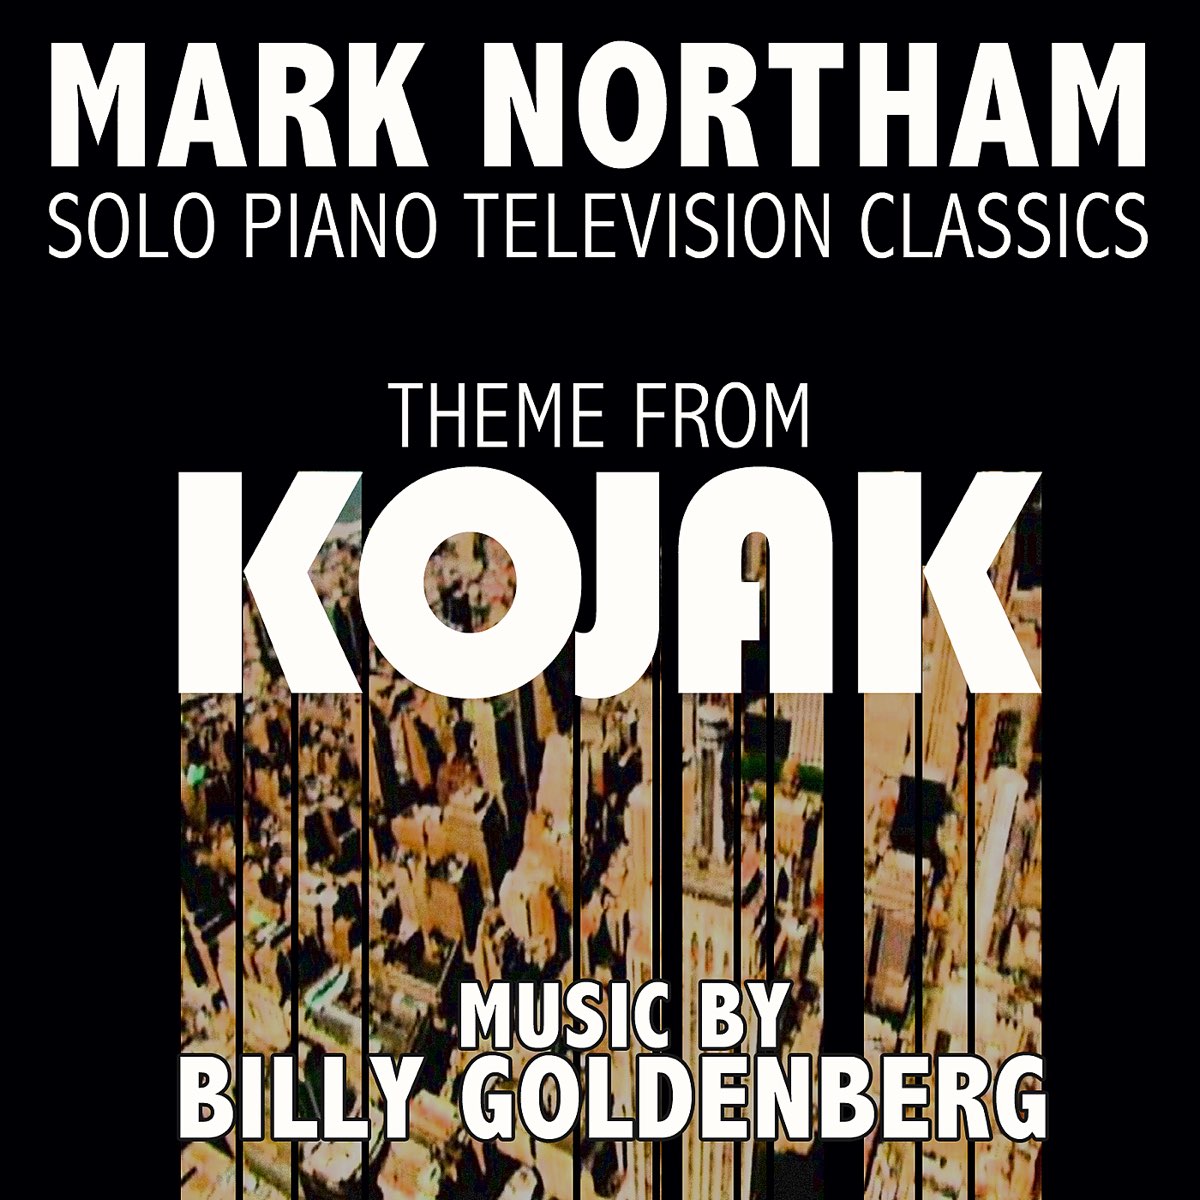 Kojak (Theme from the TV Series for Solo Piano) - Single de Billy Goldenberg  & Mark Northam en Apple Music